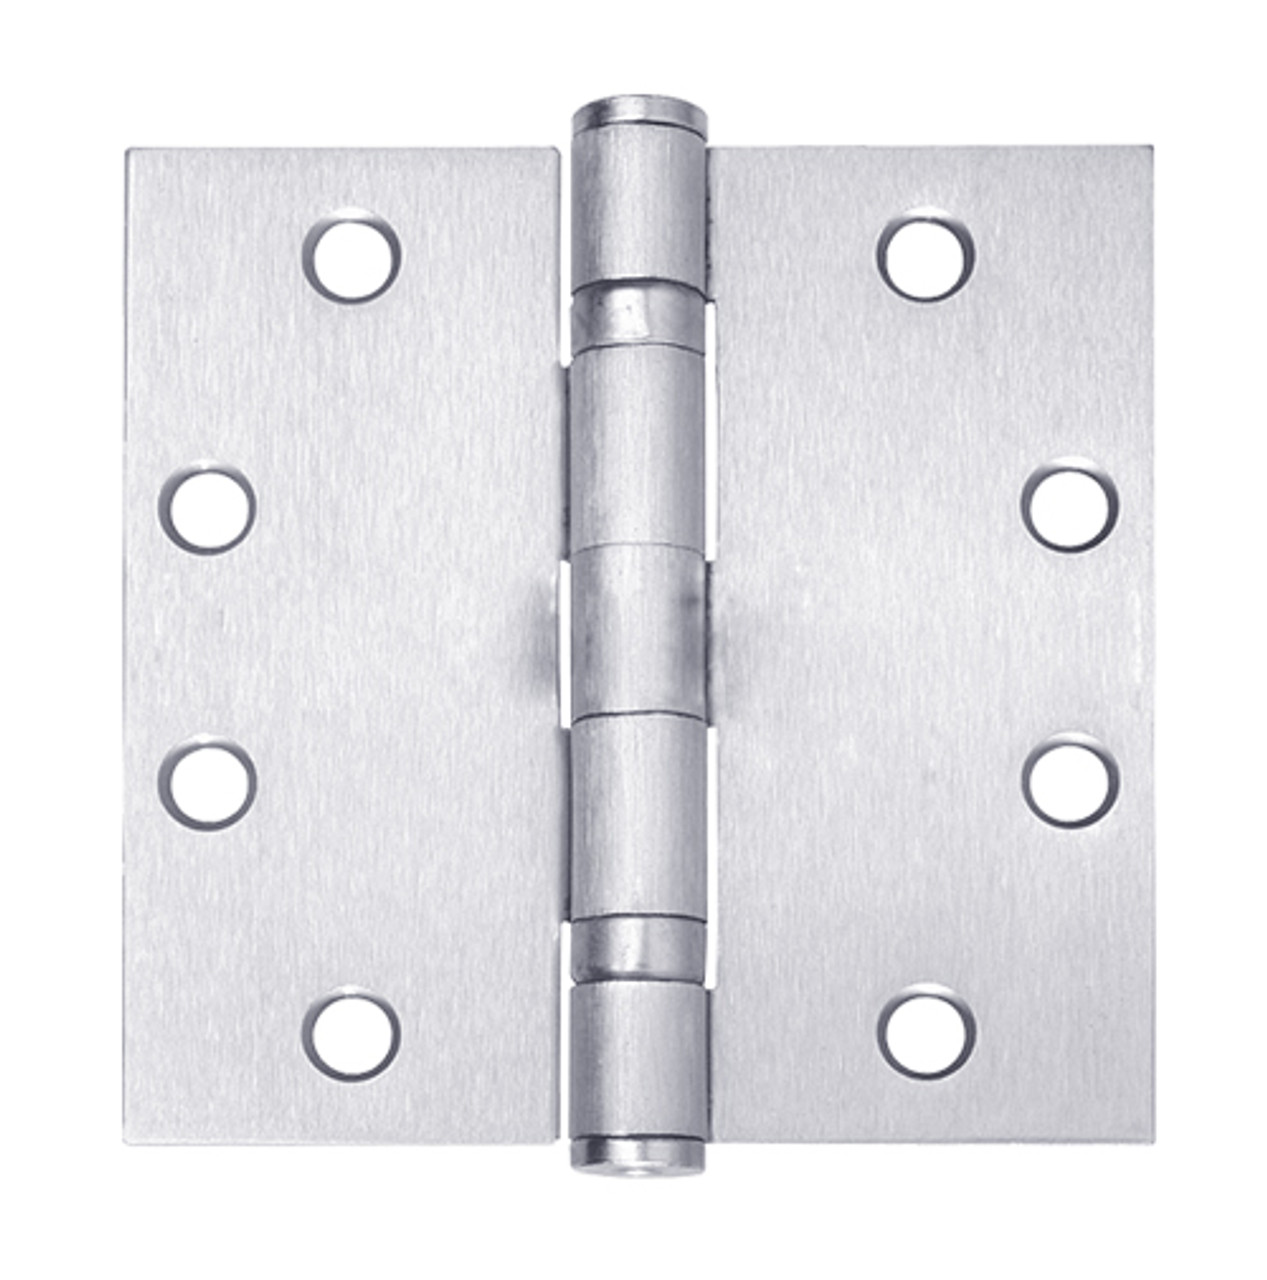 5BB1-4-5x4-5-625-TW4 IVES 5 Knuckle Ball Bearing Full Mortise Hinge with Electric Thru-Wire in Bright Chrome